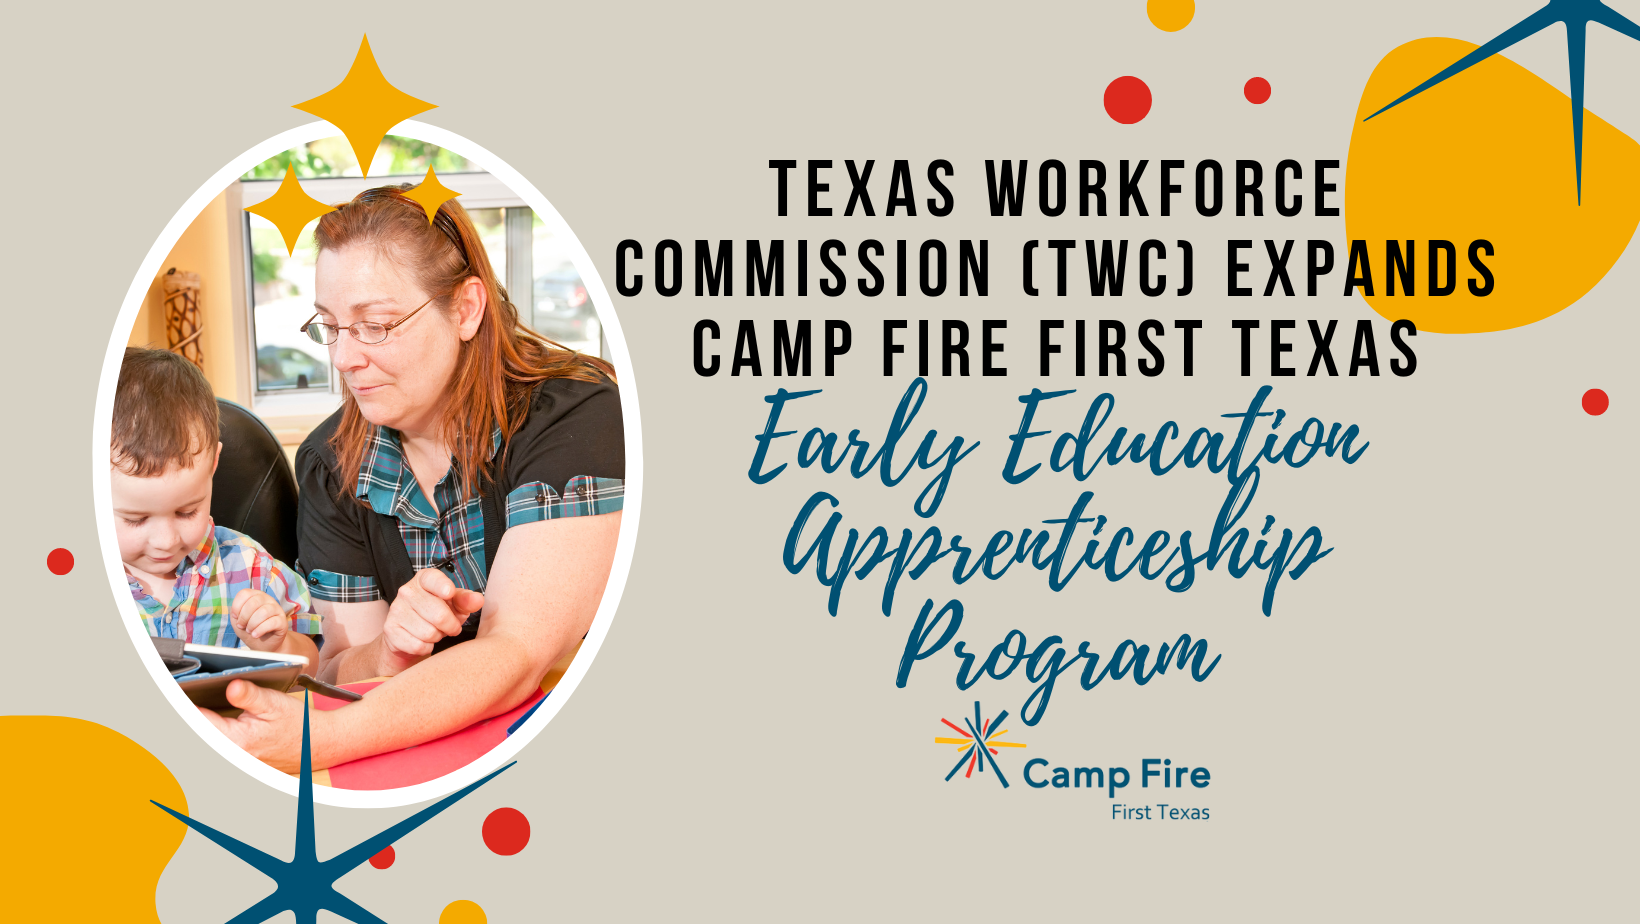 Texas Workforce Commission (TWC) Expands Camp Fire First Texas Early Education Apprenticeship Program, a Camp Fire First Texas blog